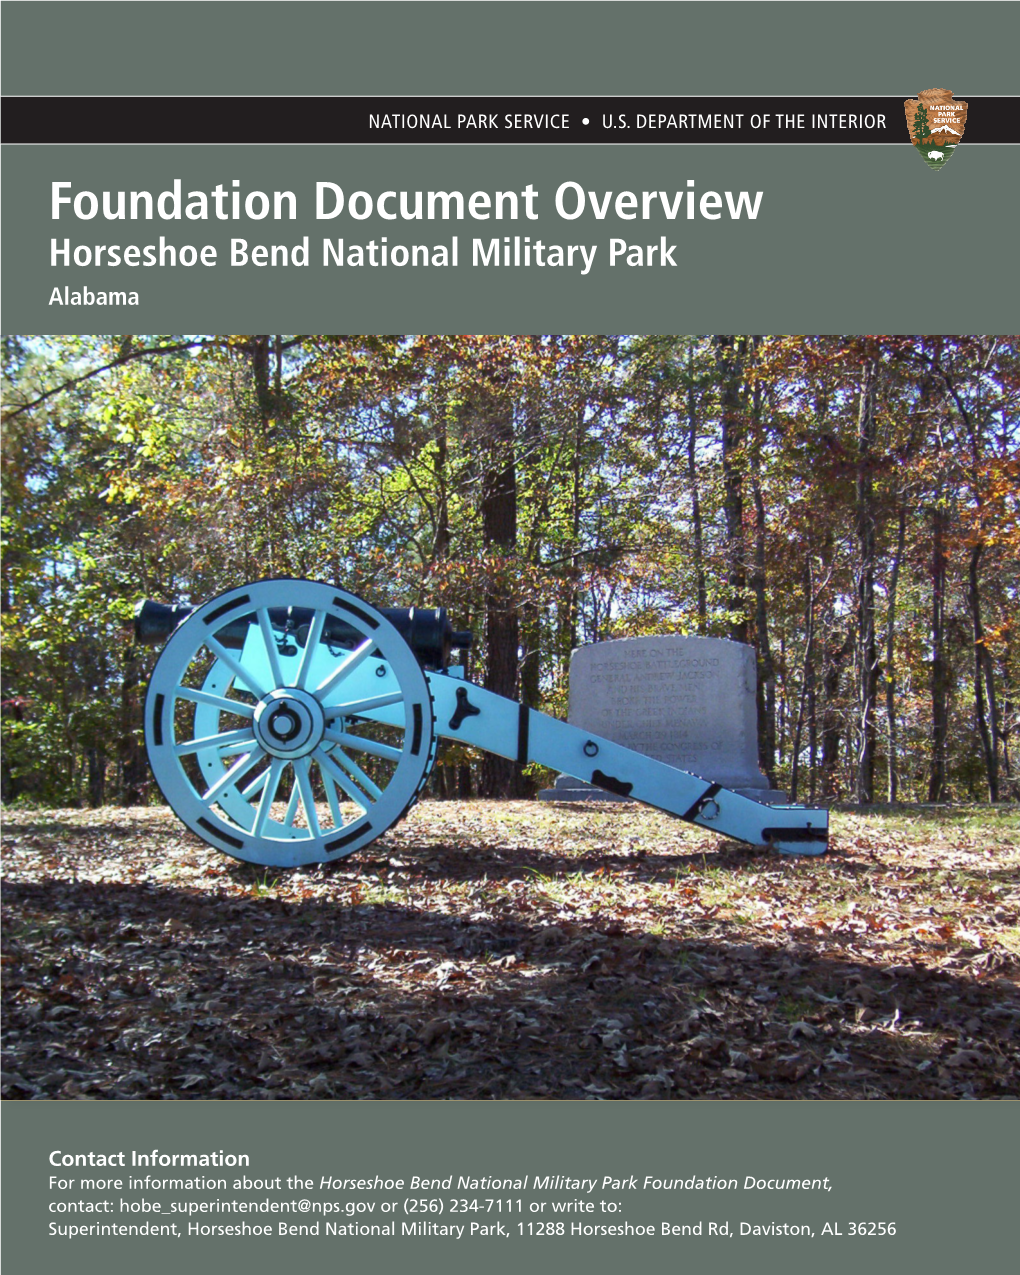 Foundation Document Overview, Horseshoe Bend National Military